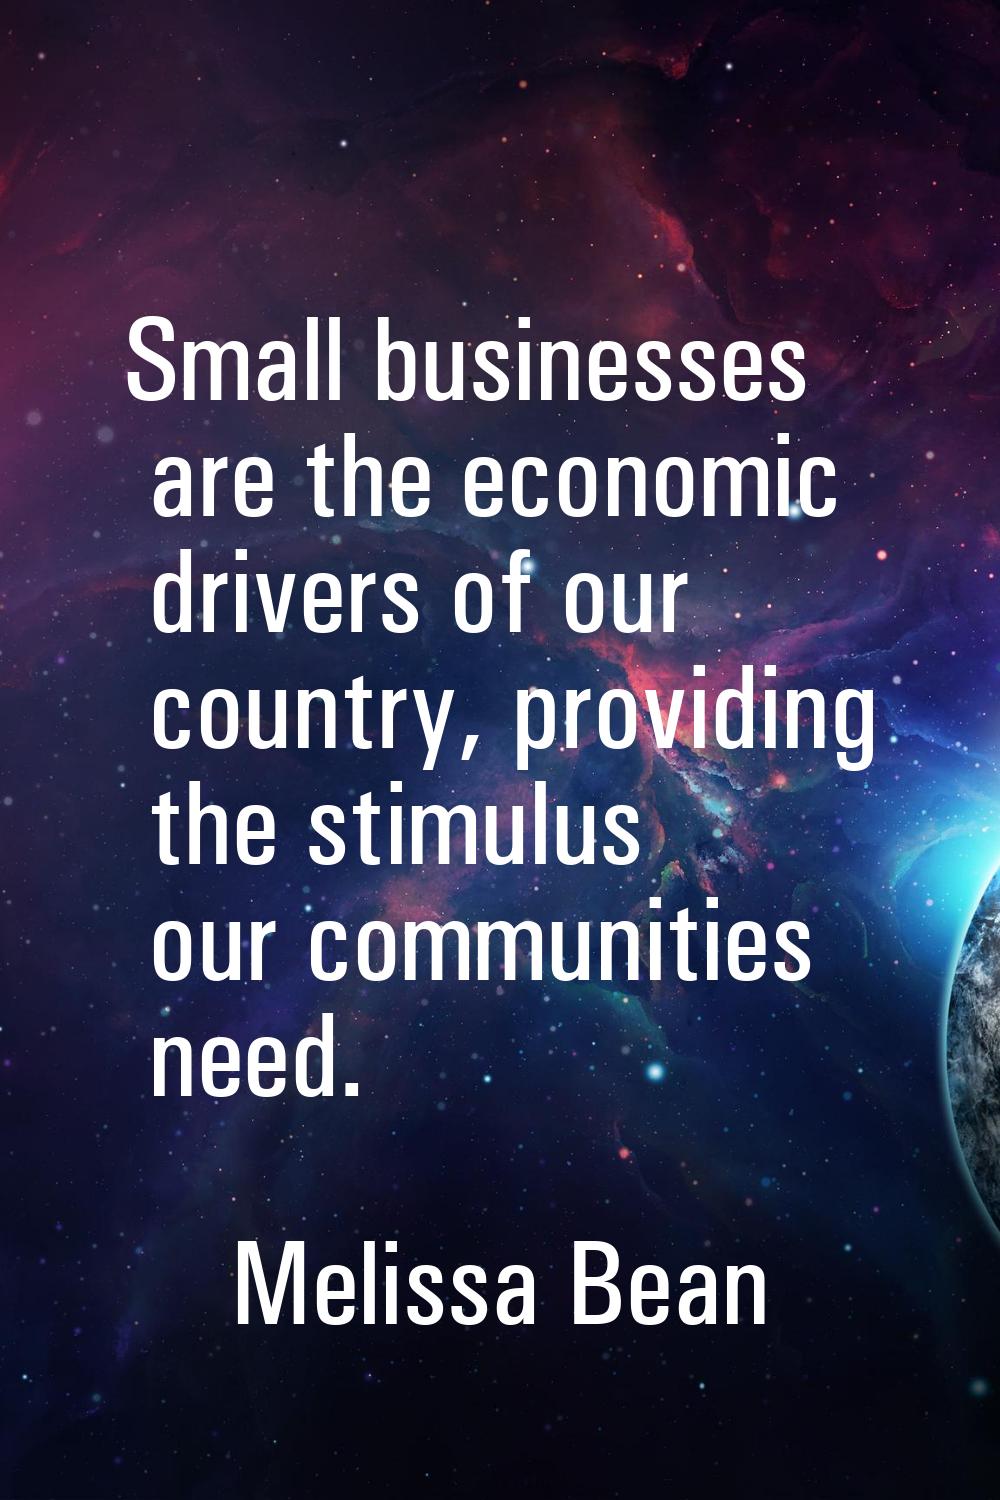 Small businesses are the economic drivers of our country, providing the stimulus our communities ne